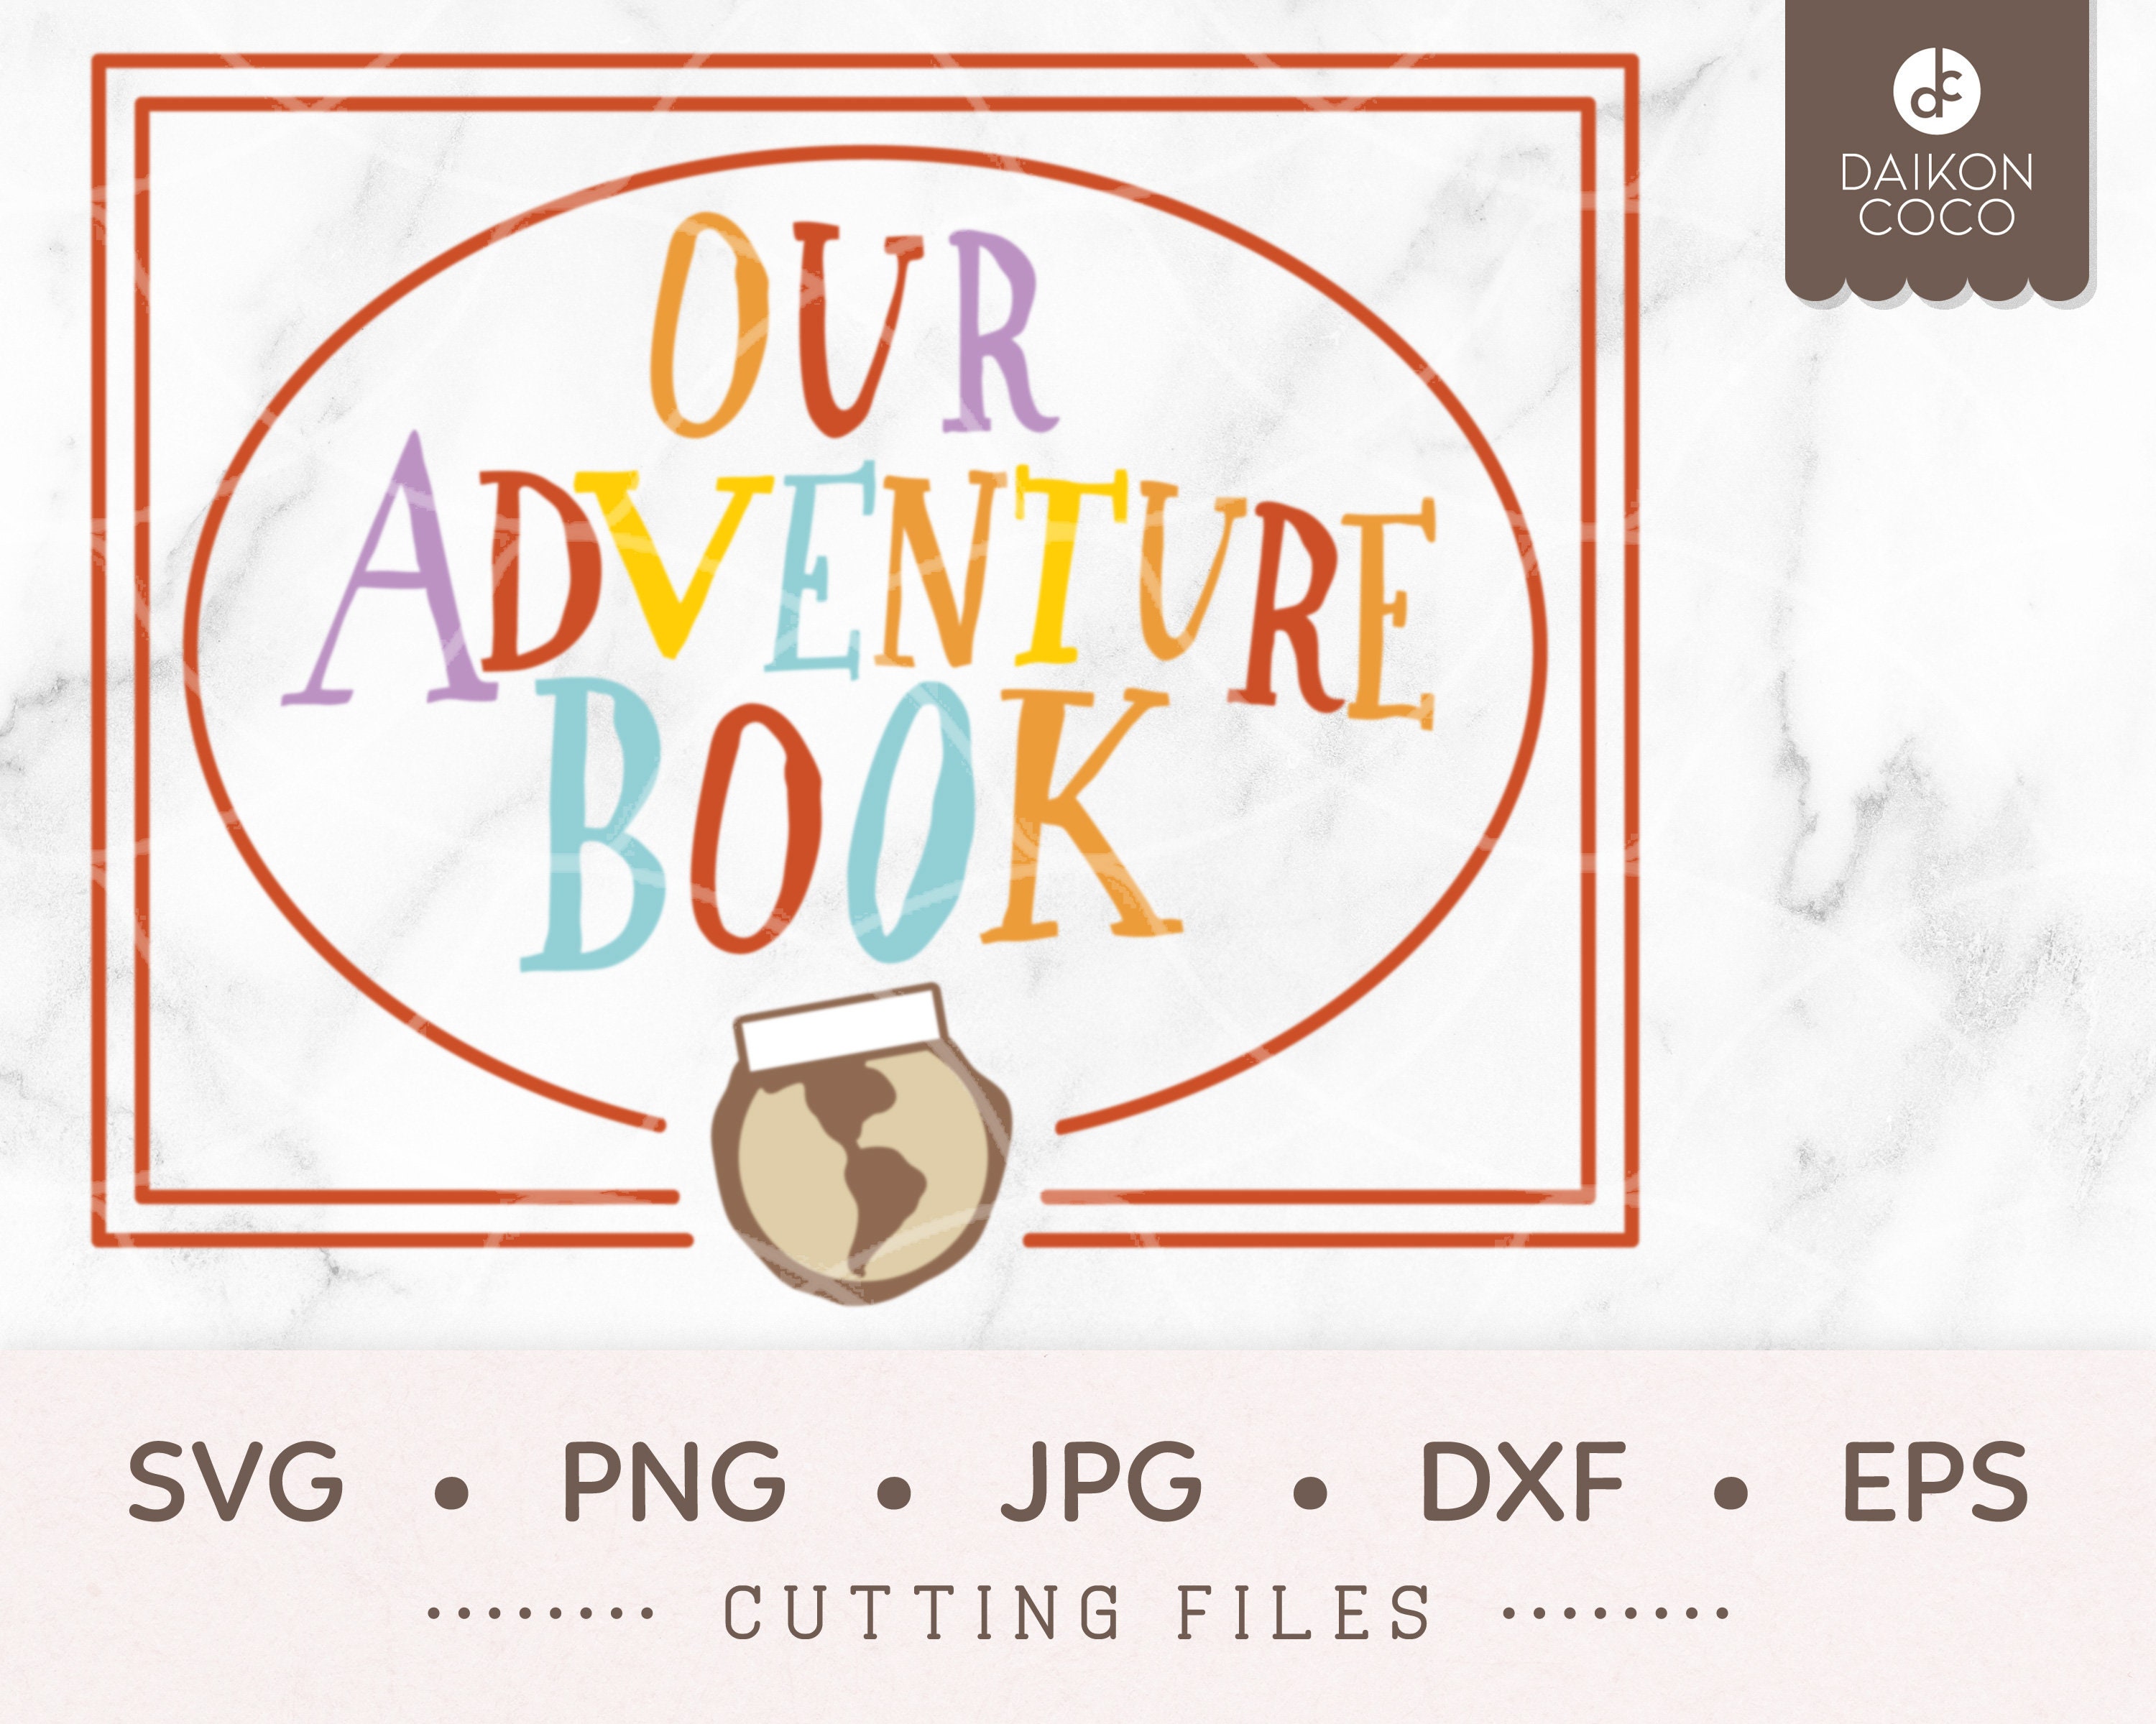 Pixar UP Our Adventure Book/Fund Sticker/Decal (Decoration) (PDF/PNG)